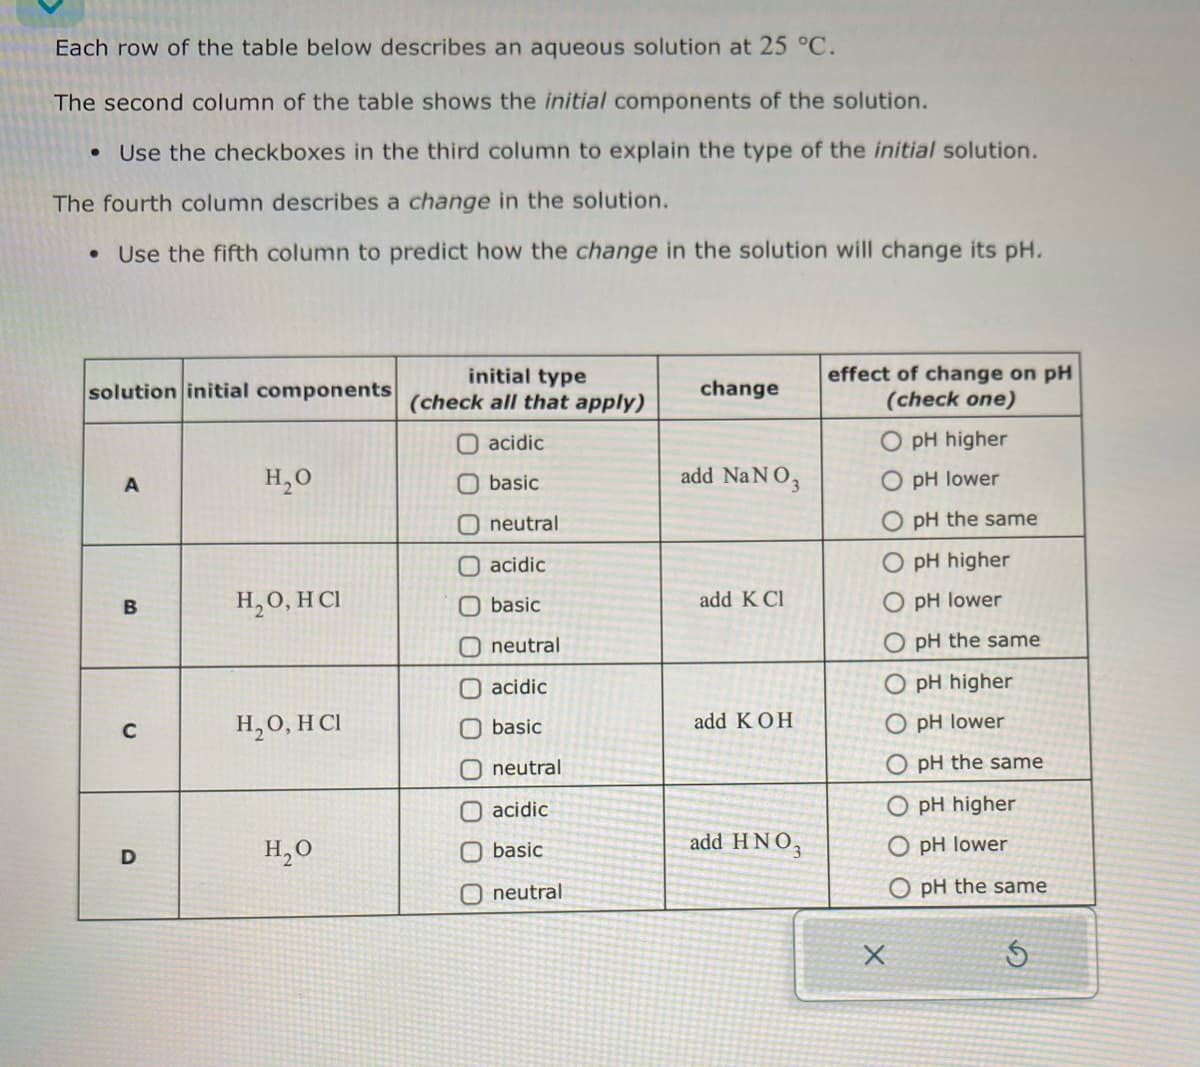 Each row of the table below describes an aqueous solution at 25 °C.
The second column of the table shows the initial components of the solution.
Use the checkboxes in the third column to explain the type of the initial solution.
The fourth column describes a change in the solution.
•
Use the fifth column to predict how the change in the solution will change its pH.
solution initial components
initial type
(check all that apply)
change
effect of change on pH
(check one)
acidic
A
H₂O
basic
add NaNO3
neutral
acidic
O pH higher
pH lower
pH the same
O pH higher
B
H₂O, HCI
basic
add K Cl
O pH lower
neutral
acidic
C
H₂O, HCI
basic
add KOH
neutral
acidic
D
H₂O
basic
add HNO3
Oneutral
O pH the same
O pH higher
O pH lower
O pH the same
O pH higher
O pH lower
O pH the same
5